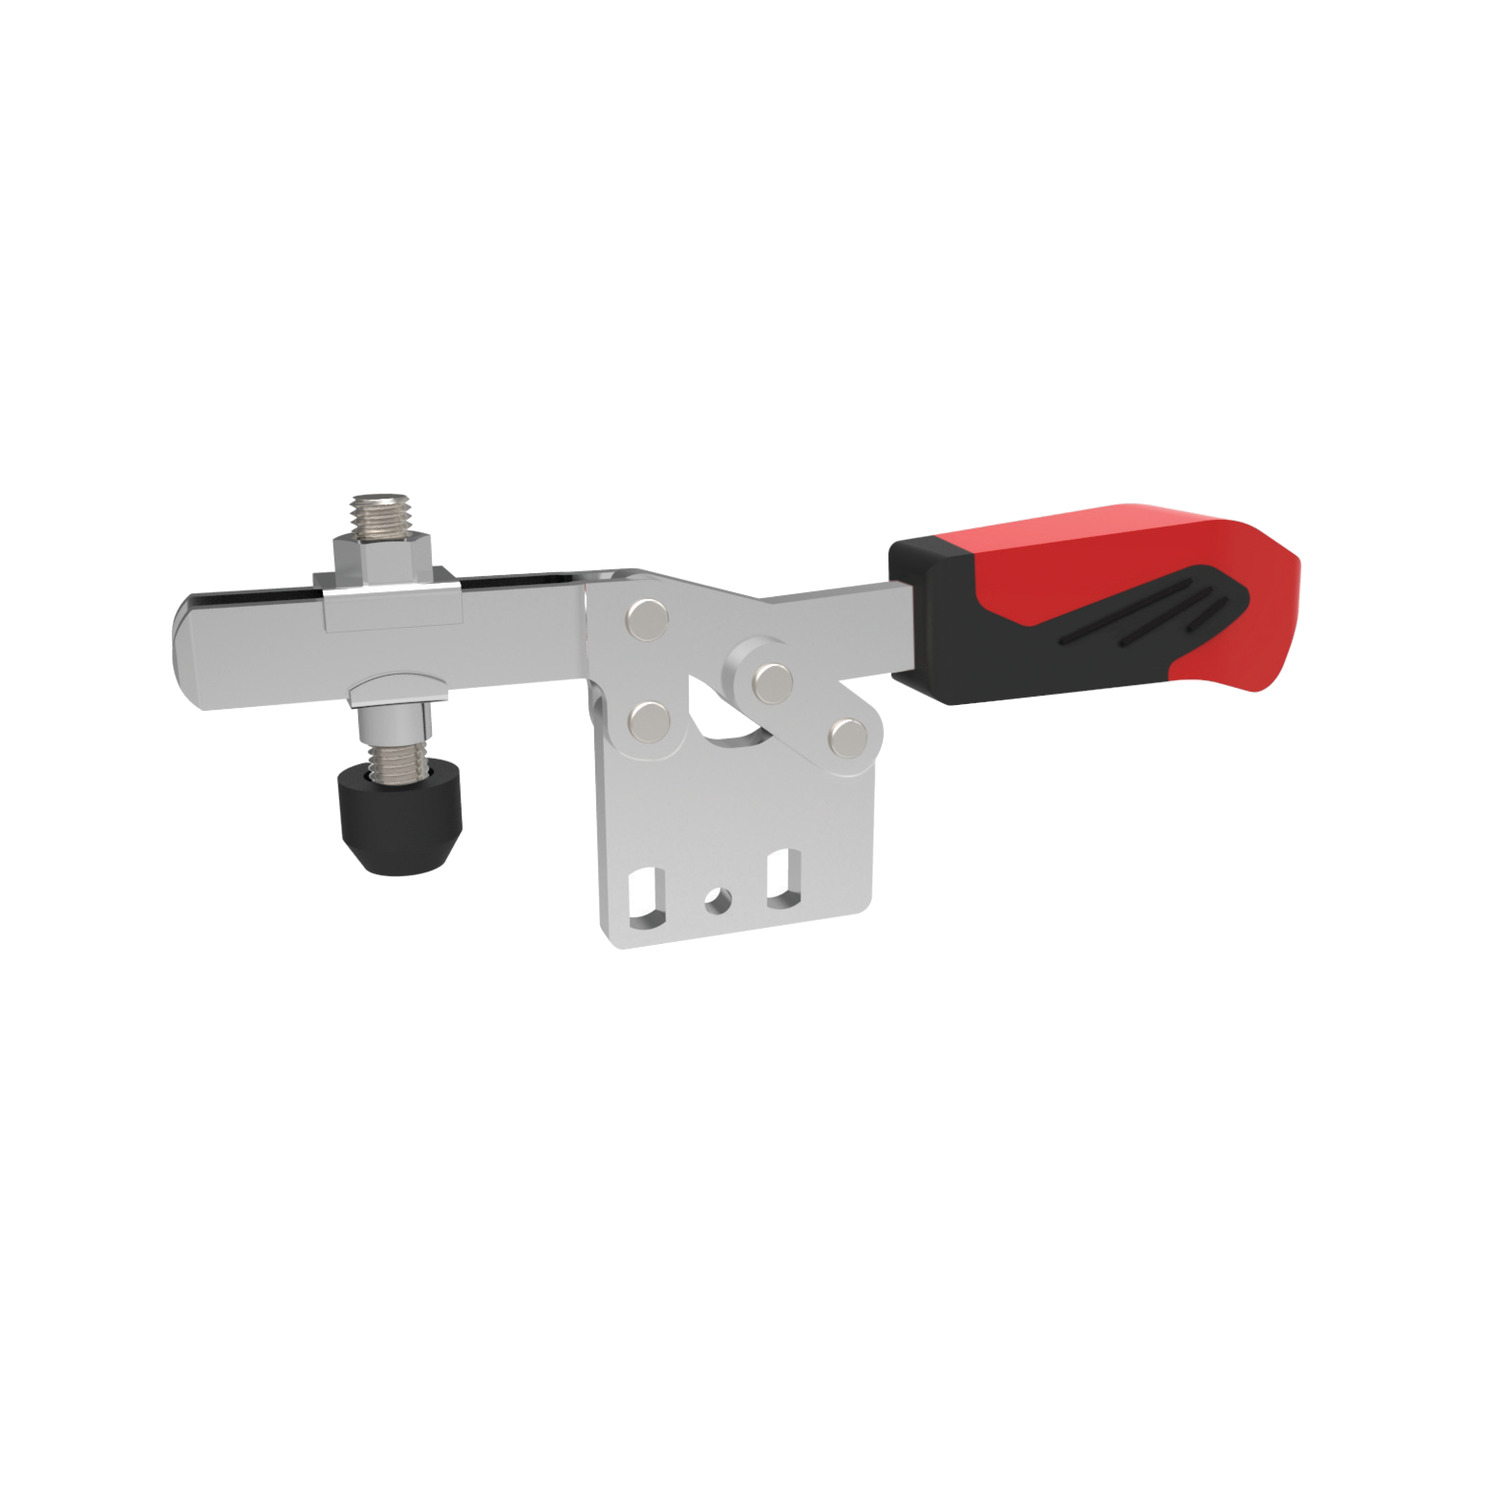 Product 41050.1, Horizontal Acting Toggle Clamps open arm - vertical base / 